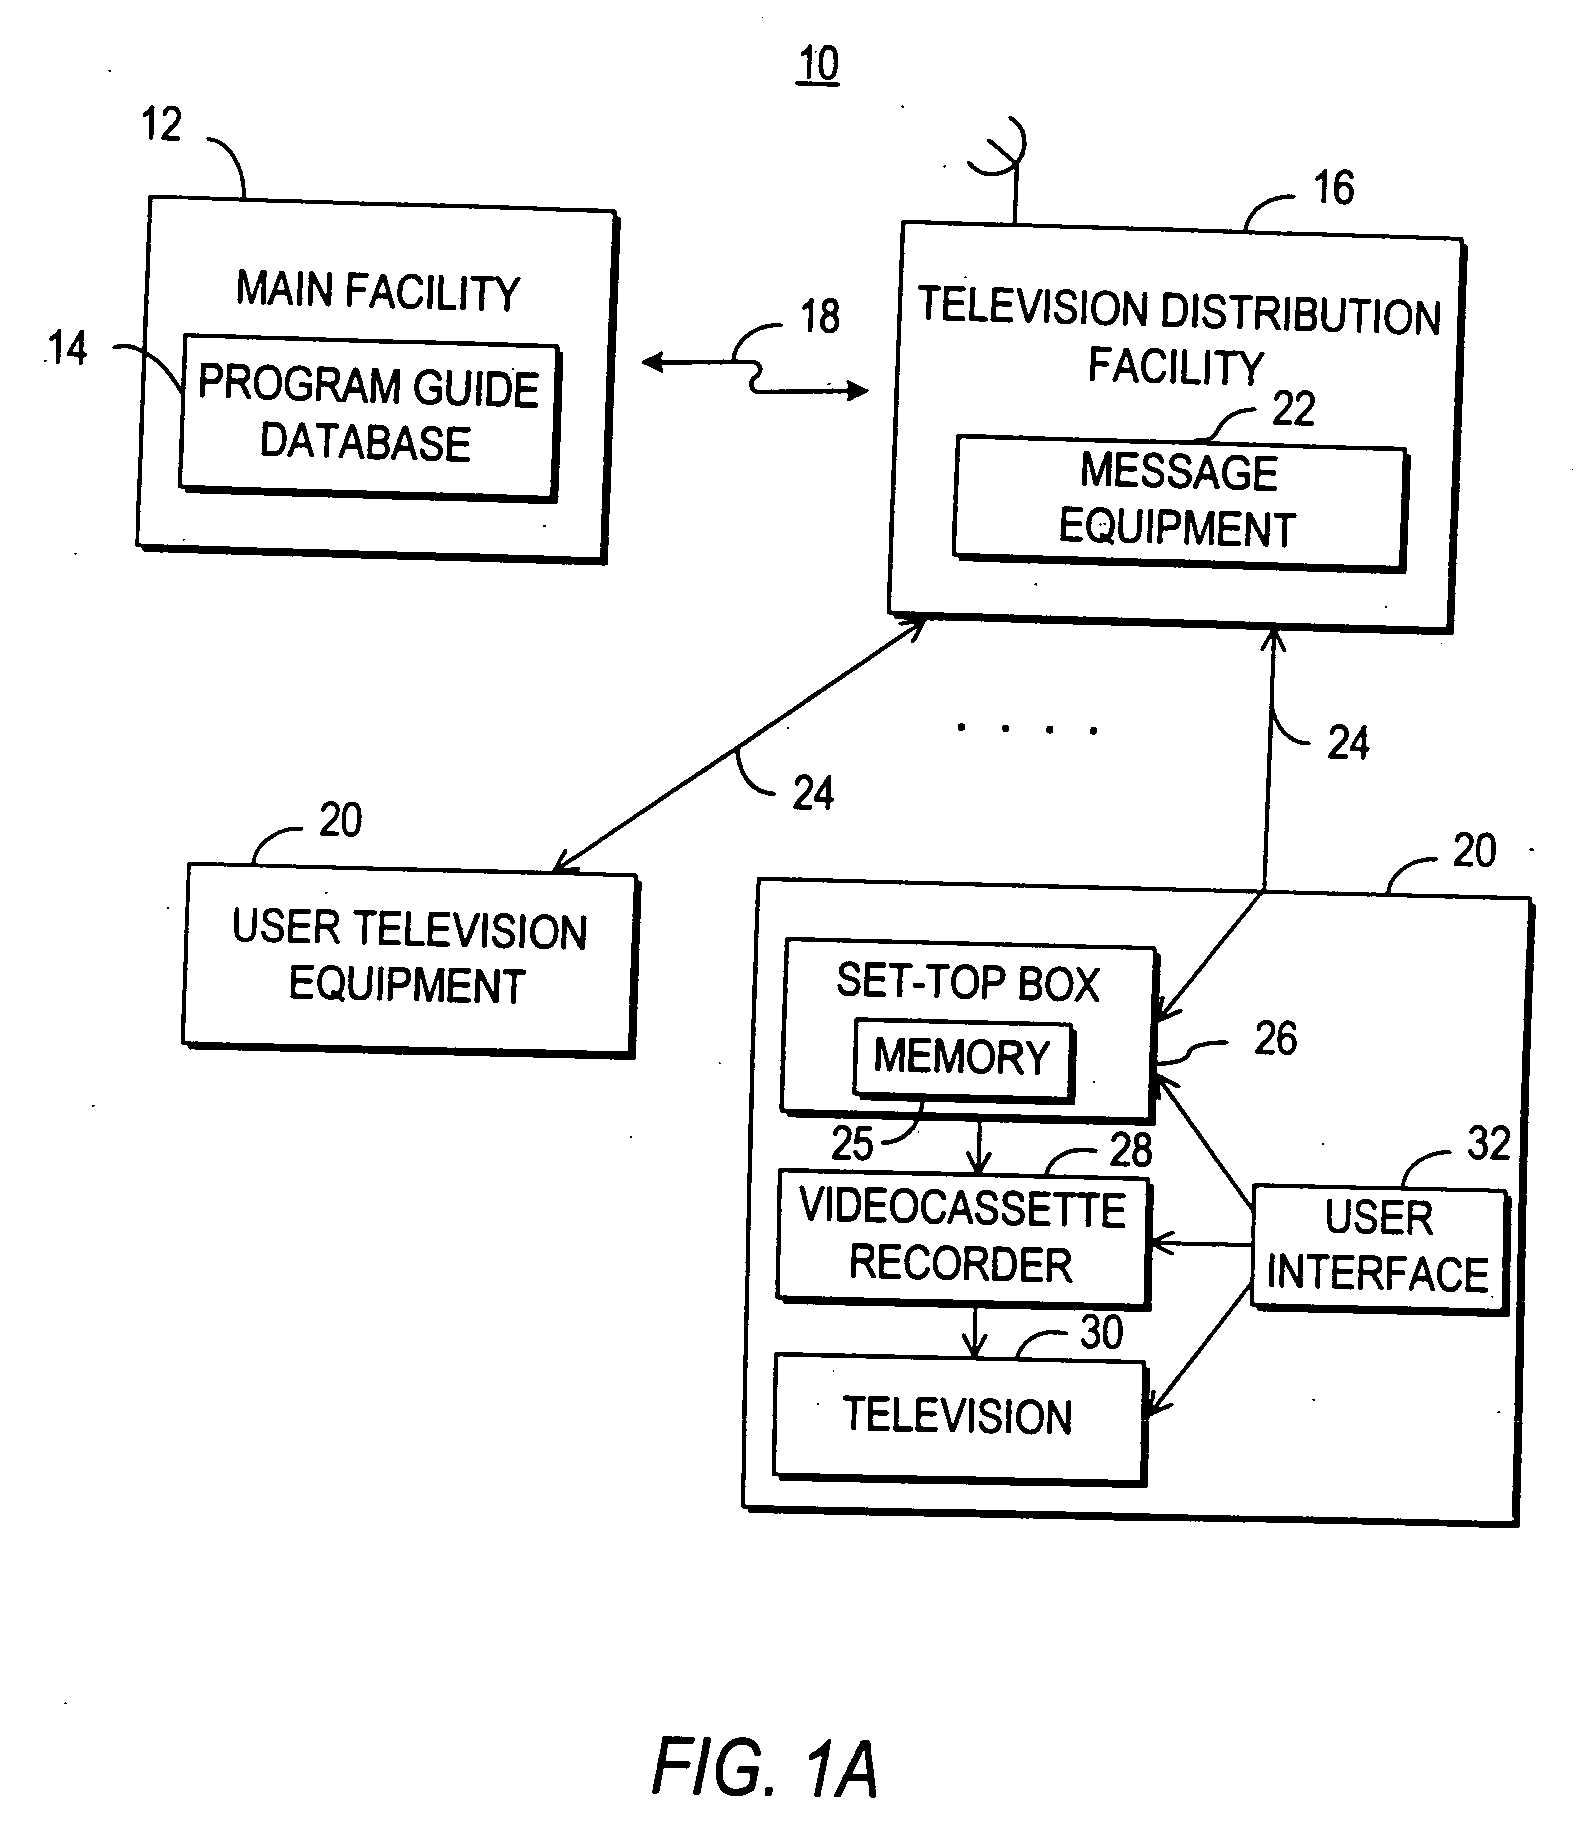 Systems and methods for providing a program as a gift using an interactive application